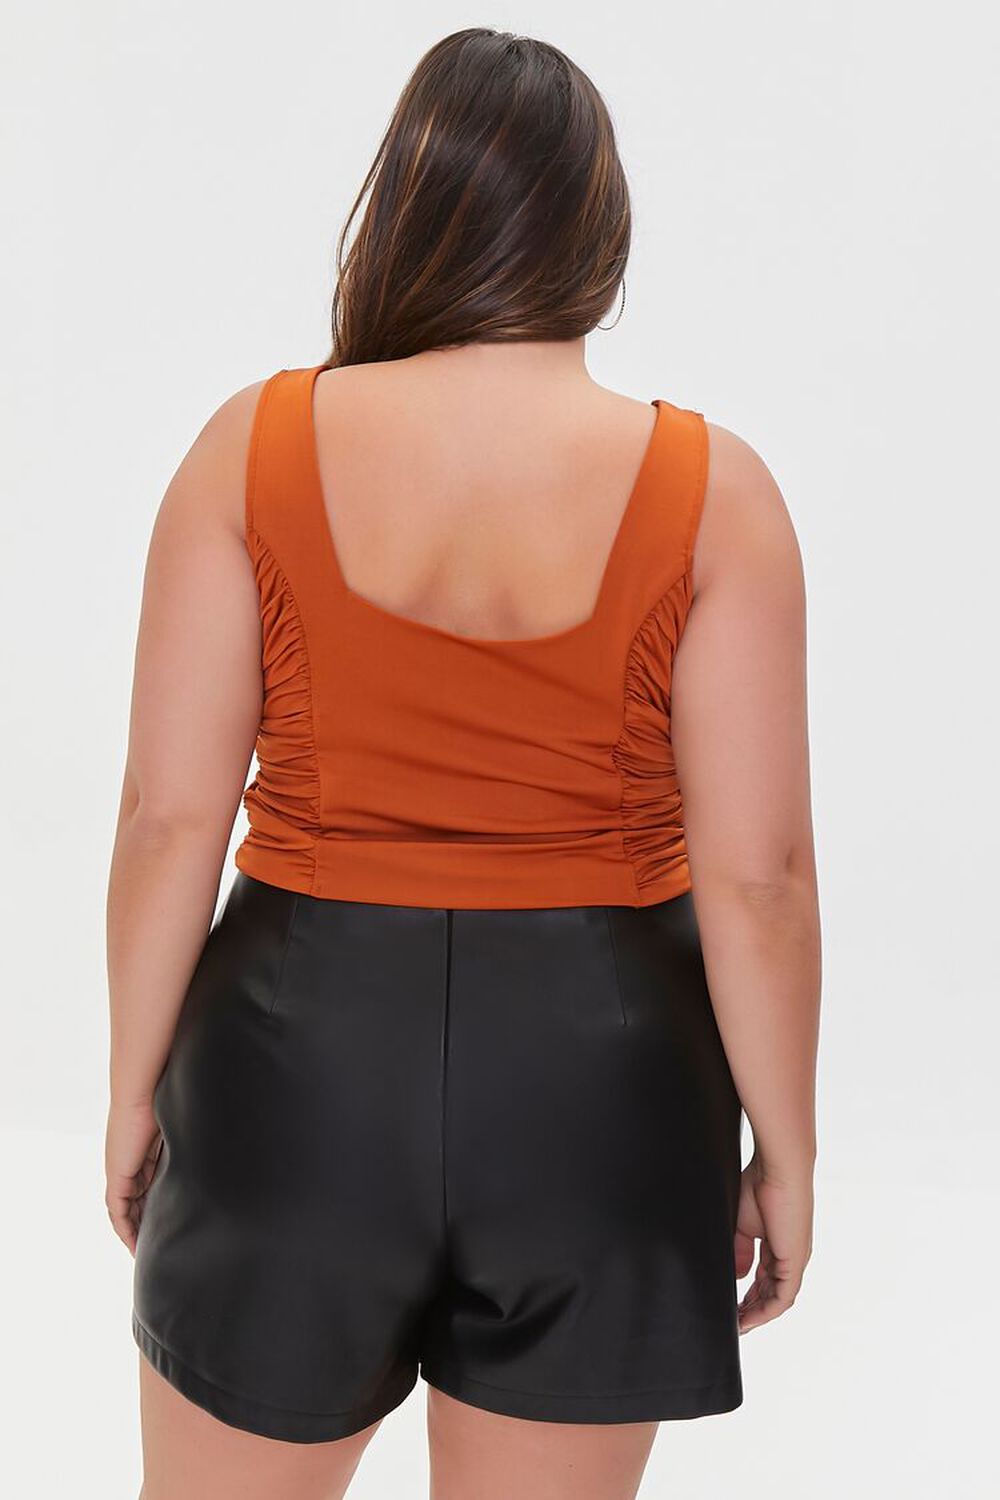 CHESTNUT Plus Size Ruched Crop Top, image 3